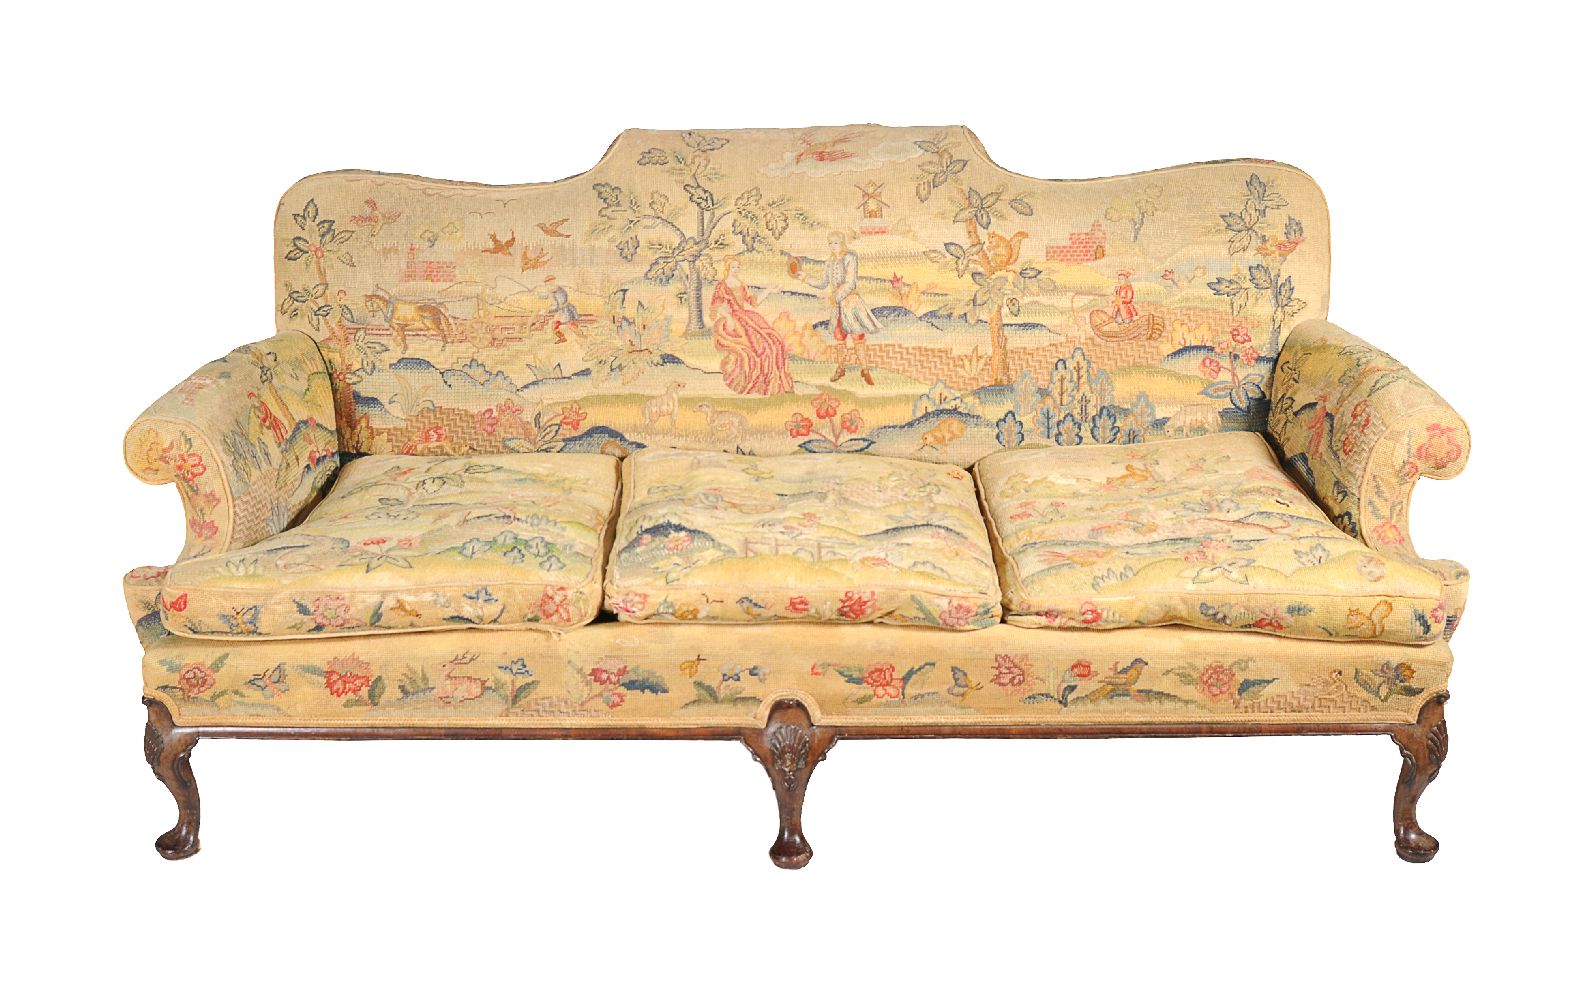 A carved walnut and woolwork upholstered sofa in Queen Anne style, late 19th century